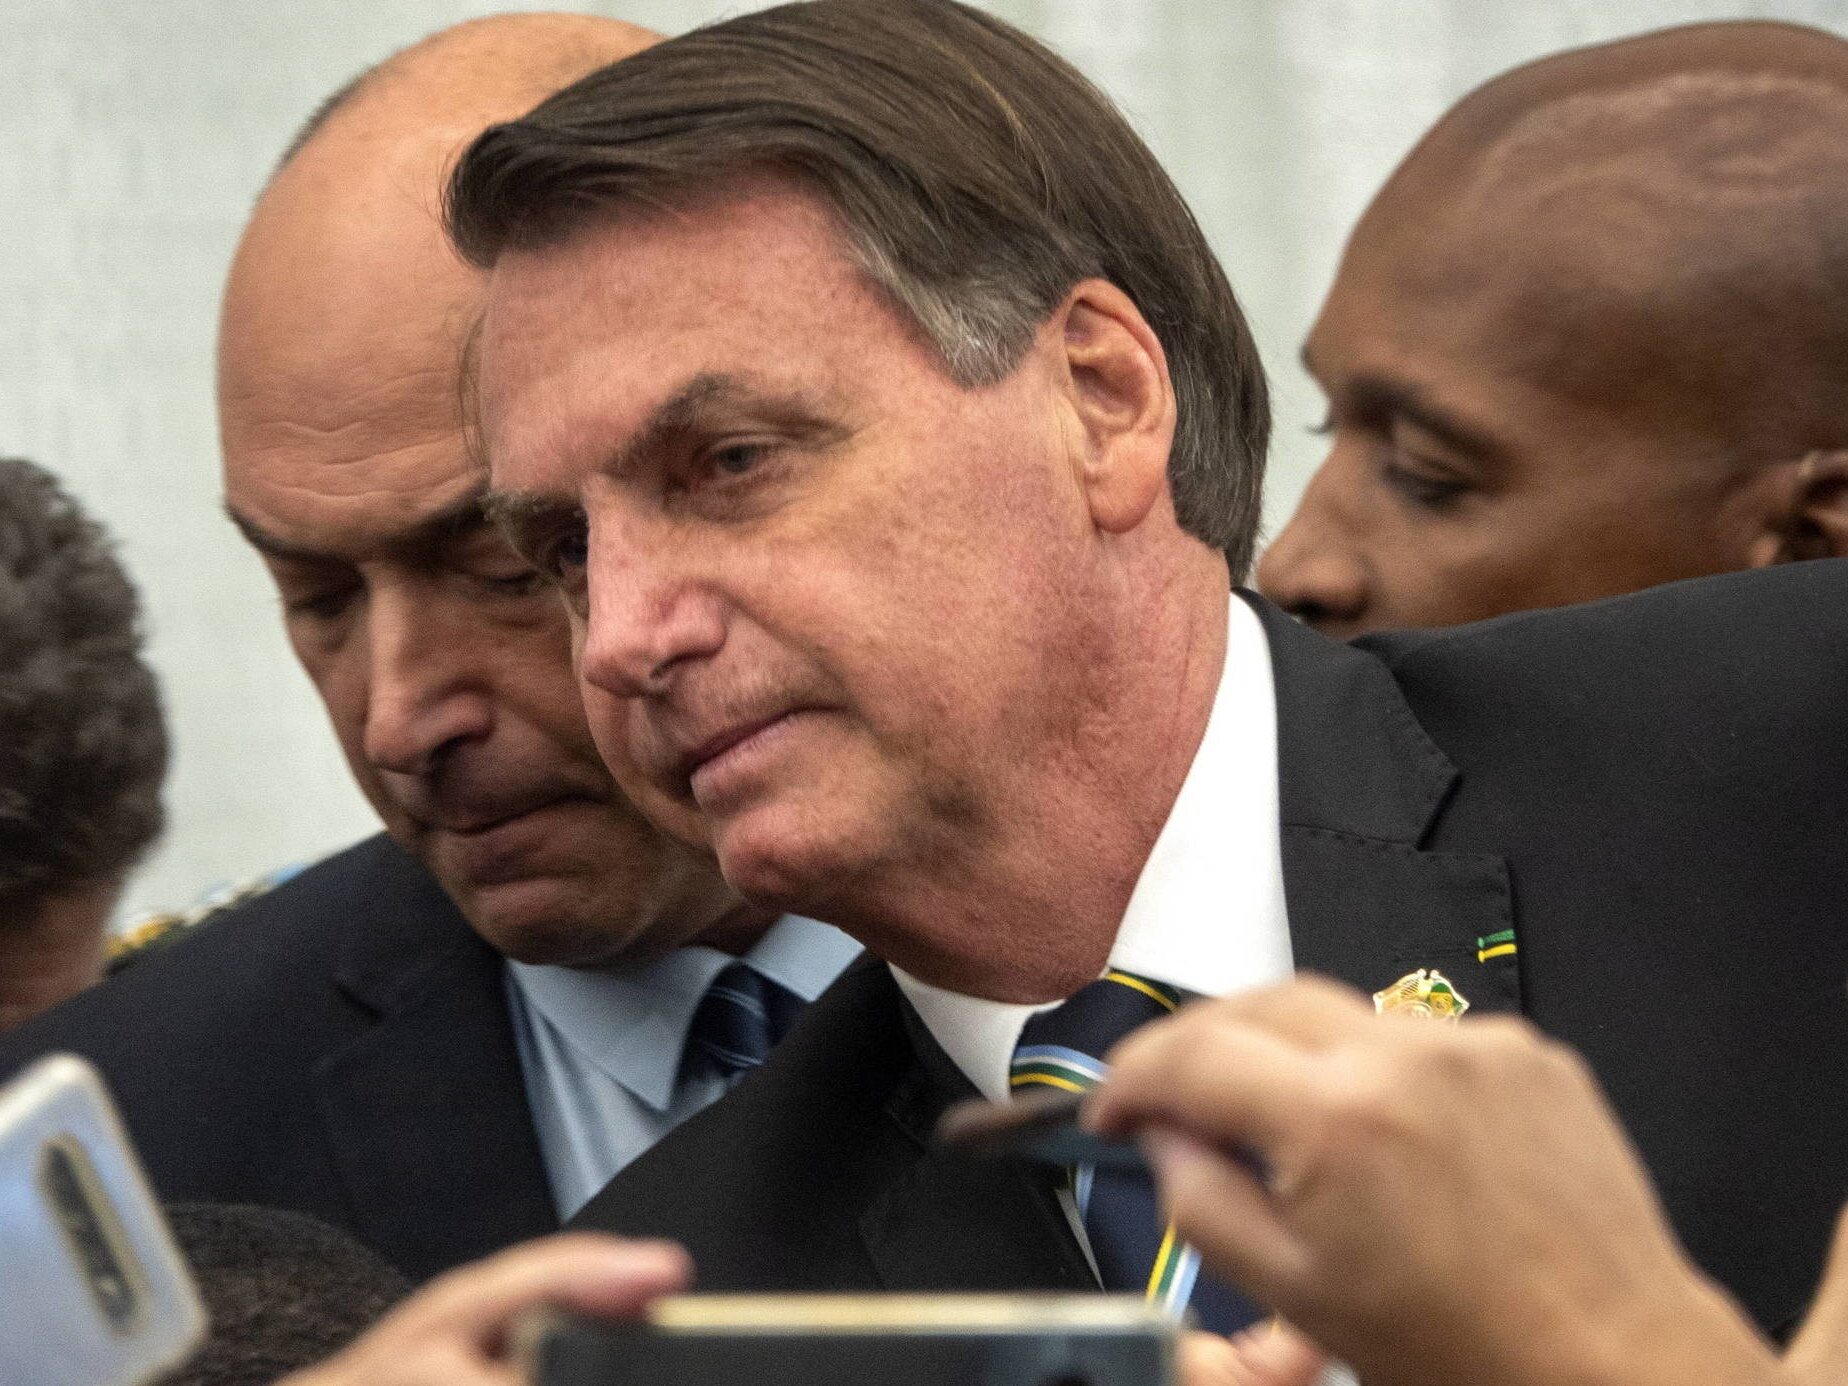 The President of Brazil rejects the health class